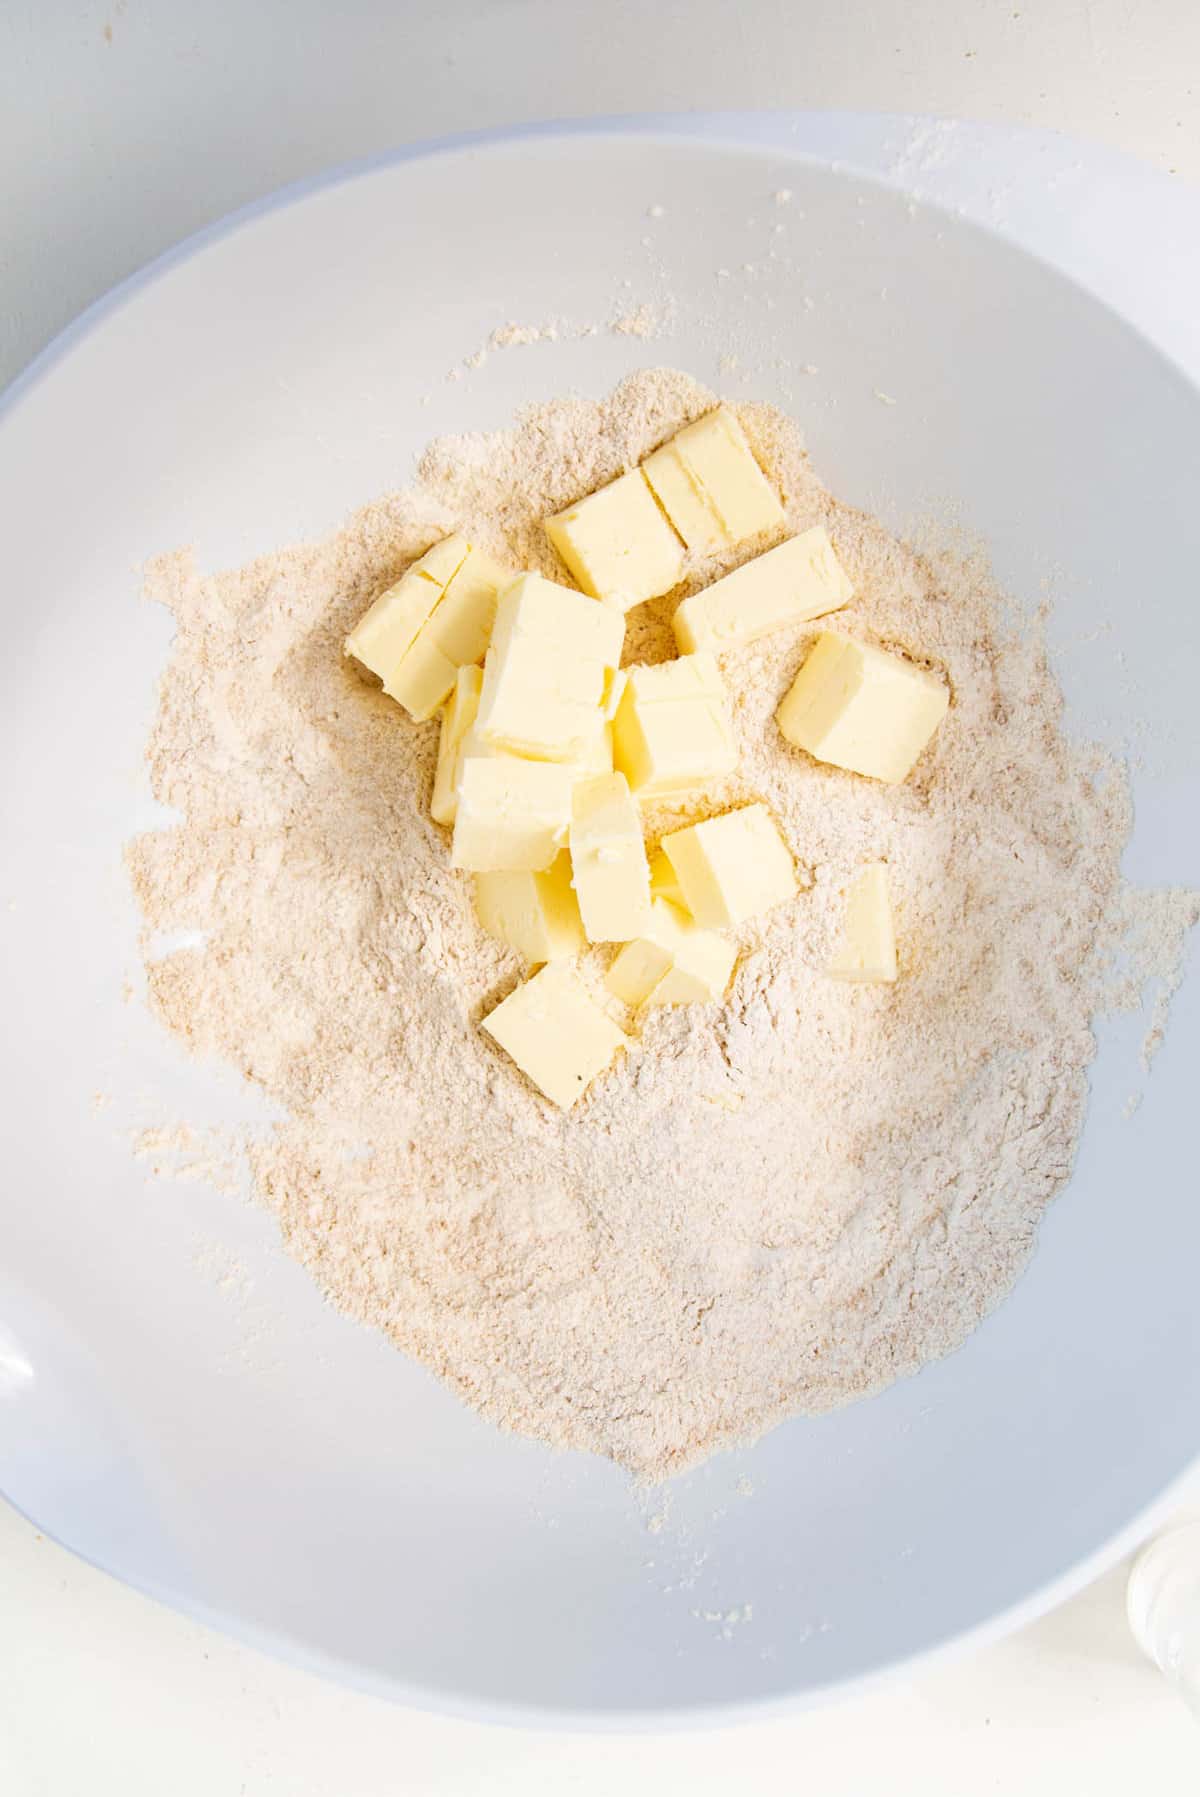 Cubed cold butter added to the dry ingredients in the bowl.